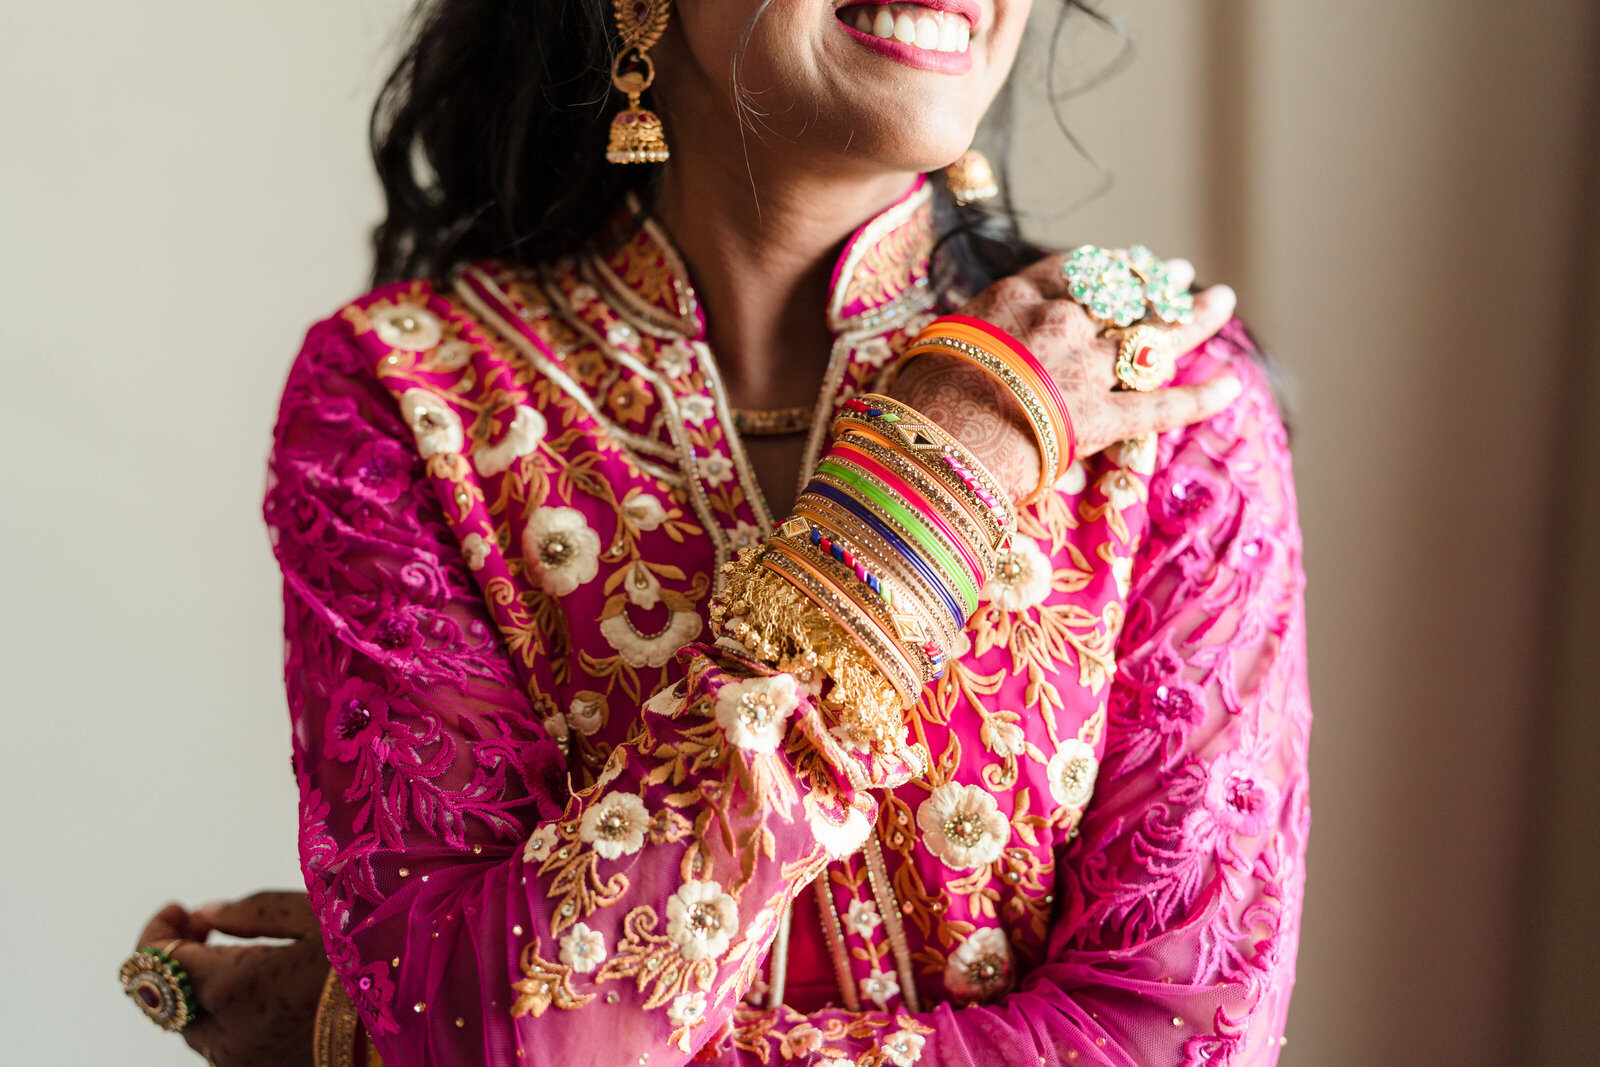 An Indian bride crosses her arms and smiles, showing off her bracelets and henna